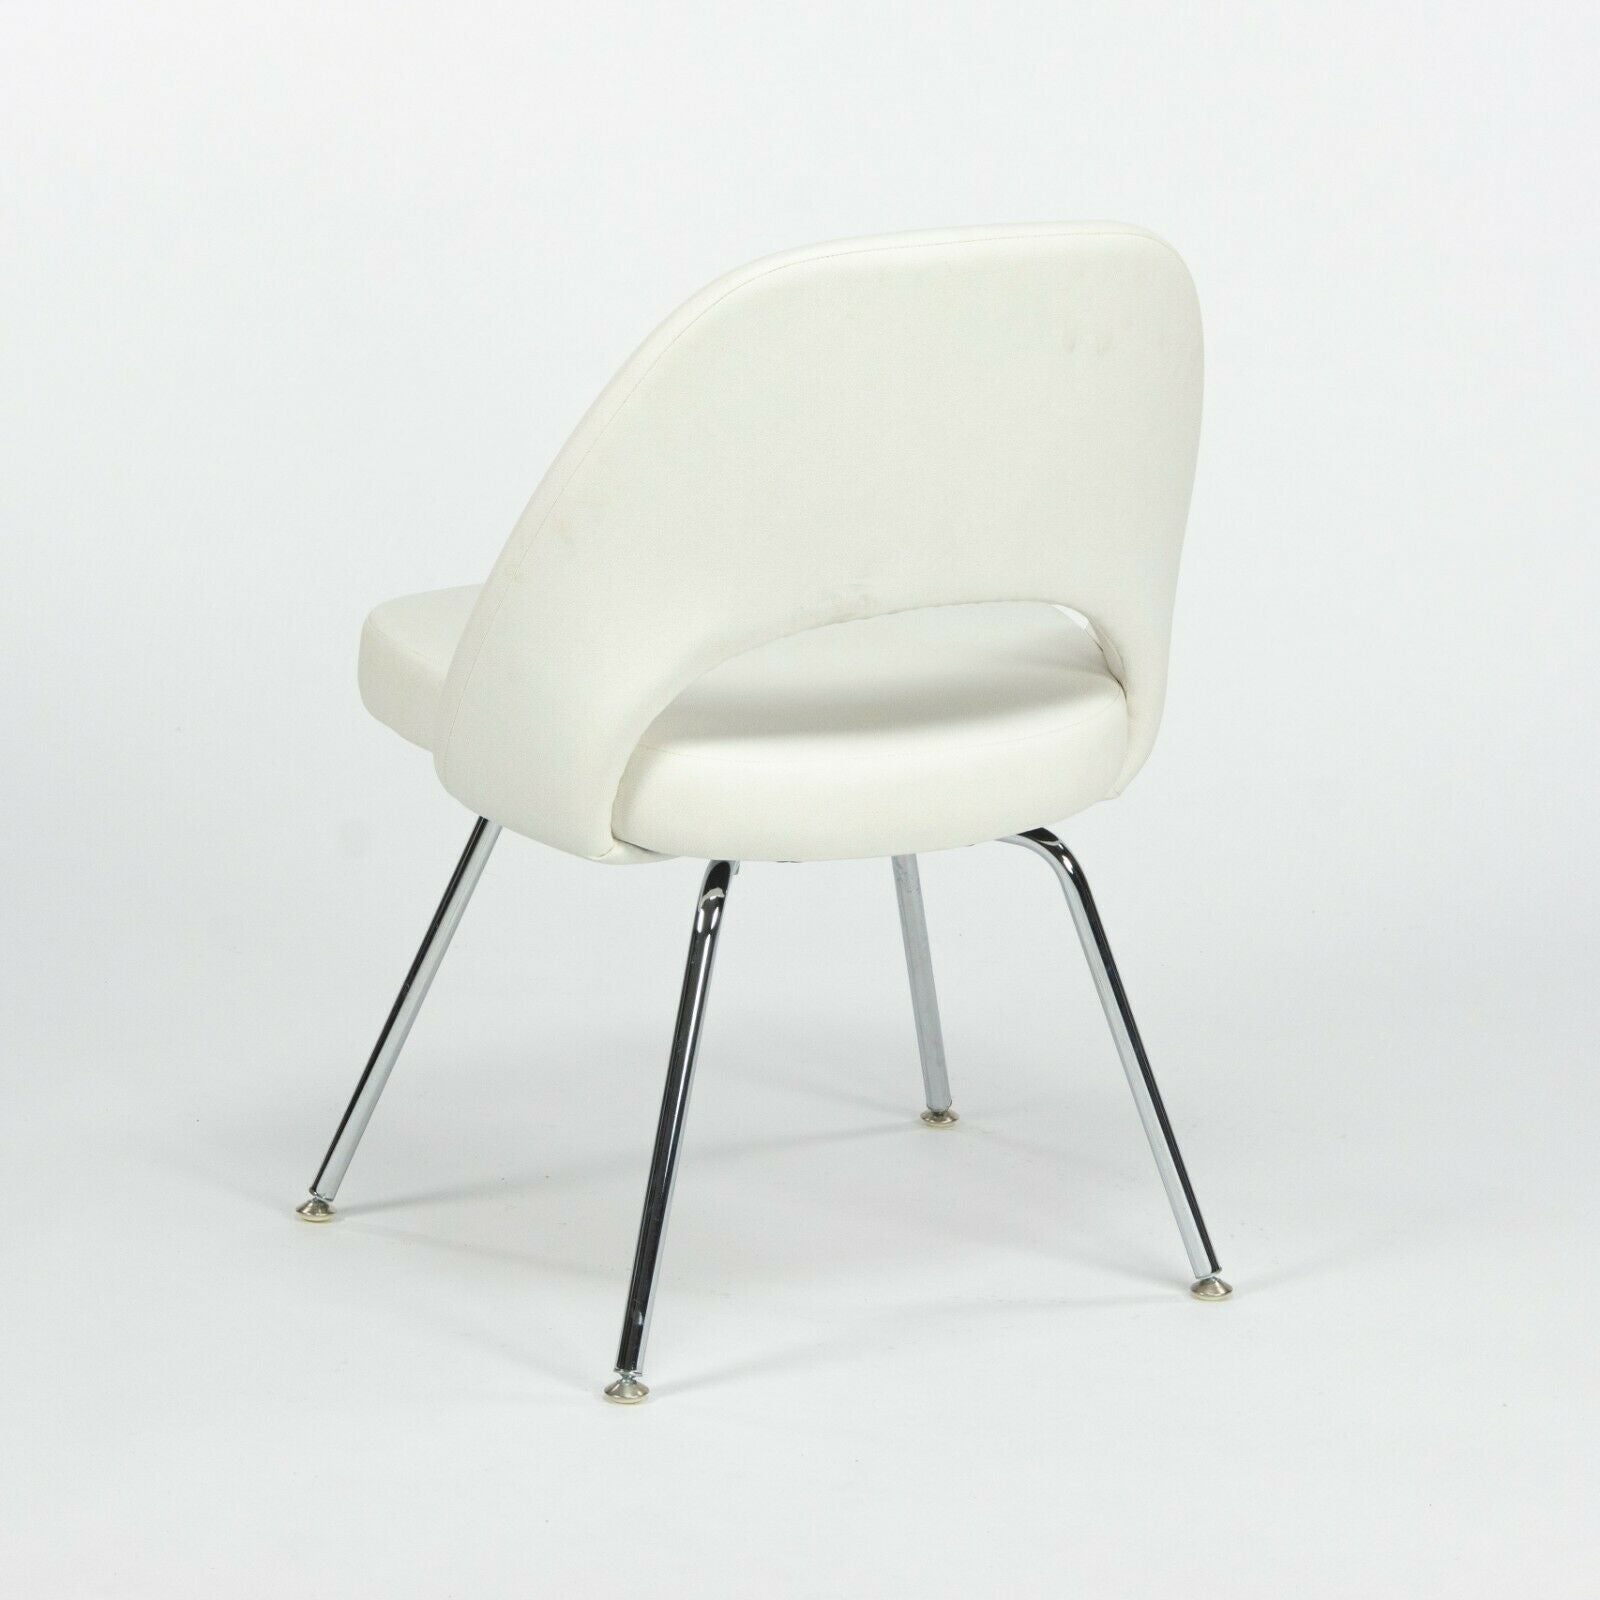 SOLD Eero Saarinen Knoll 2020 White Leather Executive Side Chair with Chrome Legs 2x Available